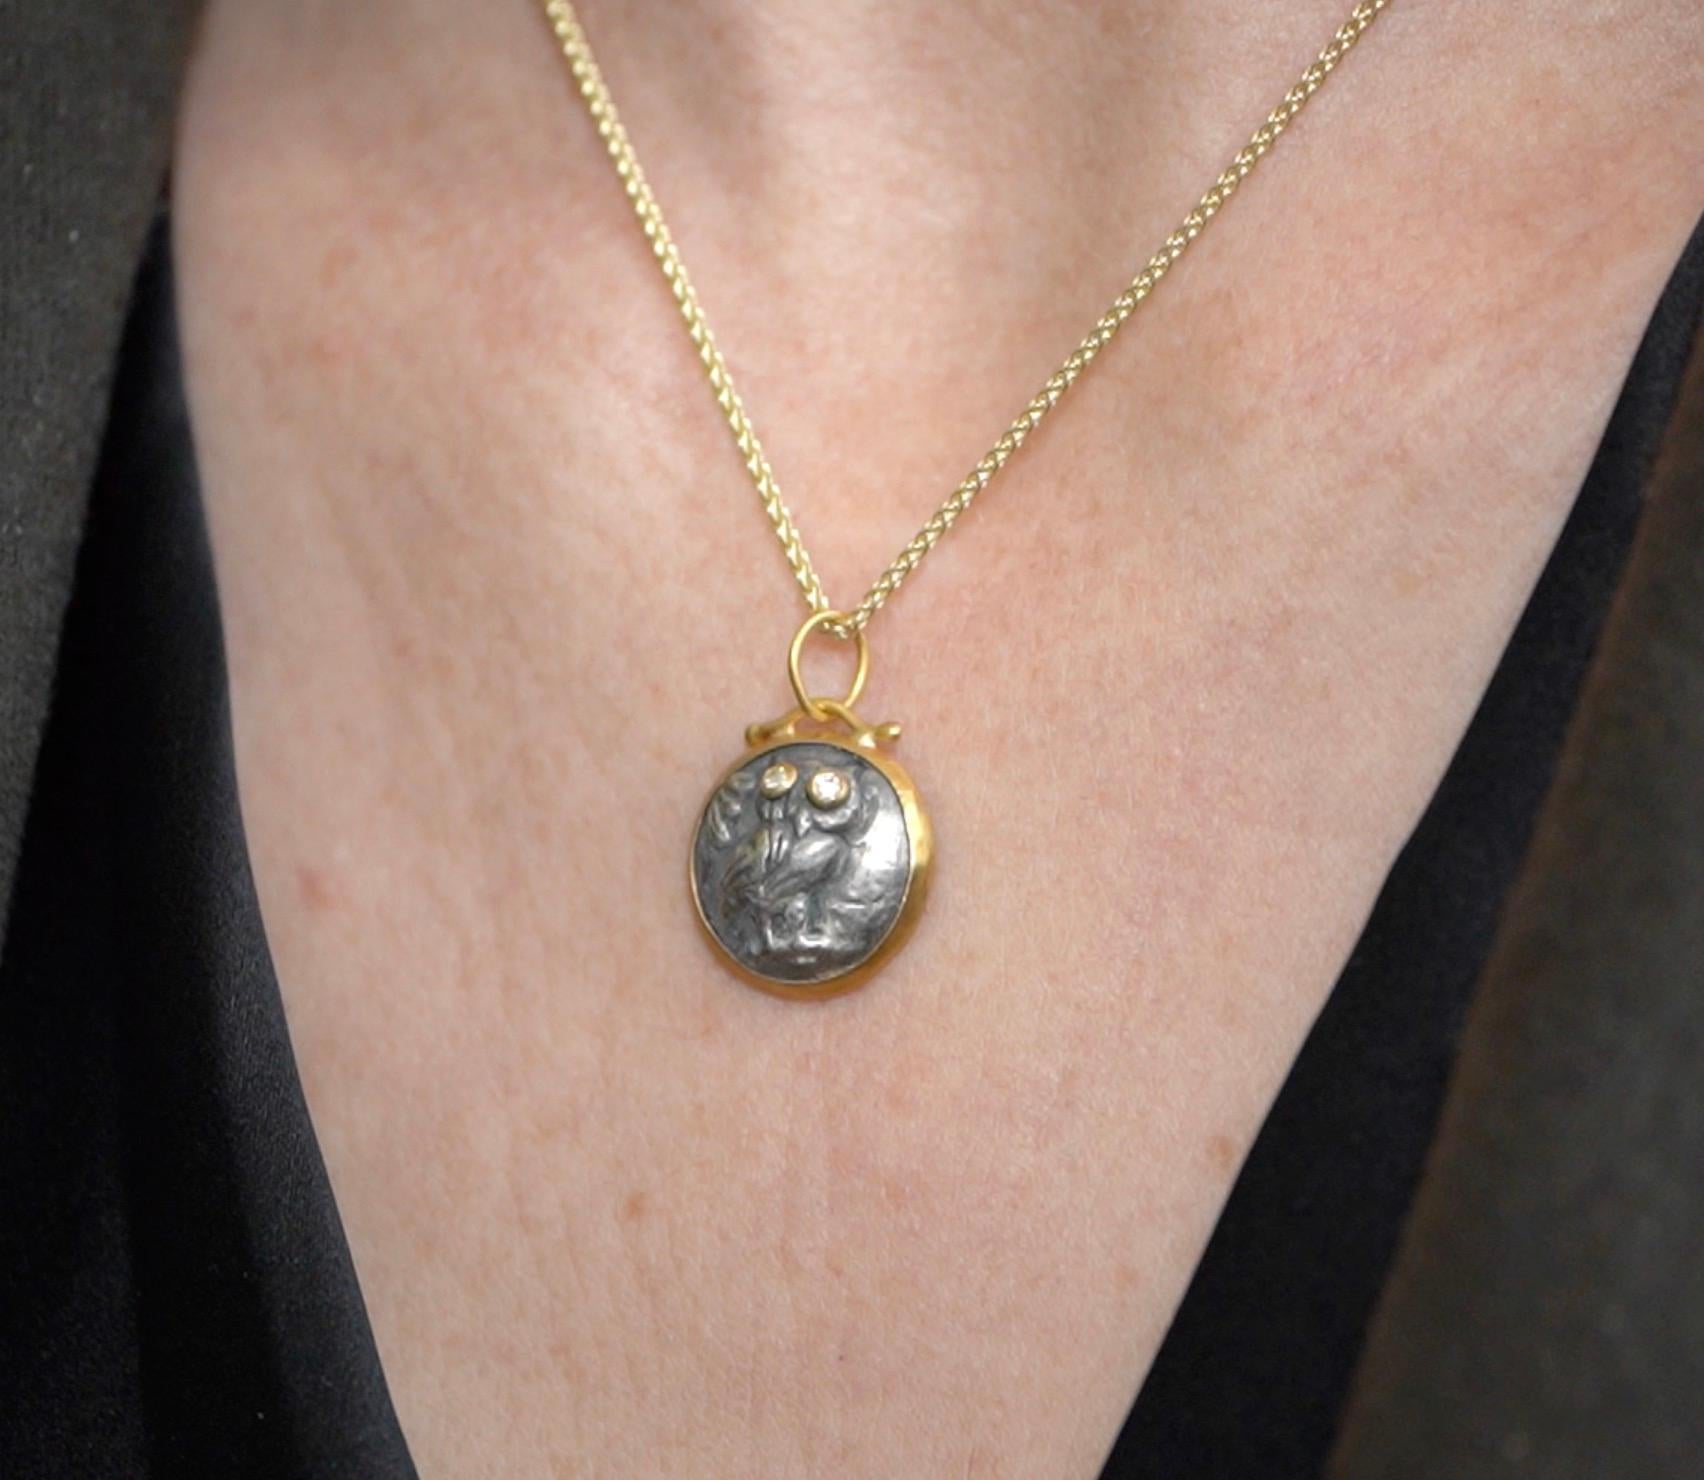 2010s owl necklace